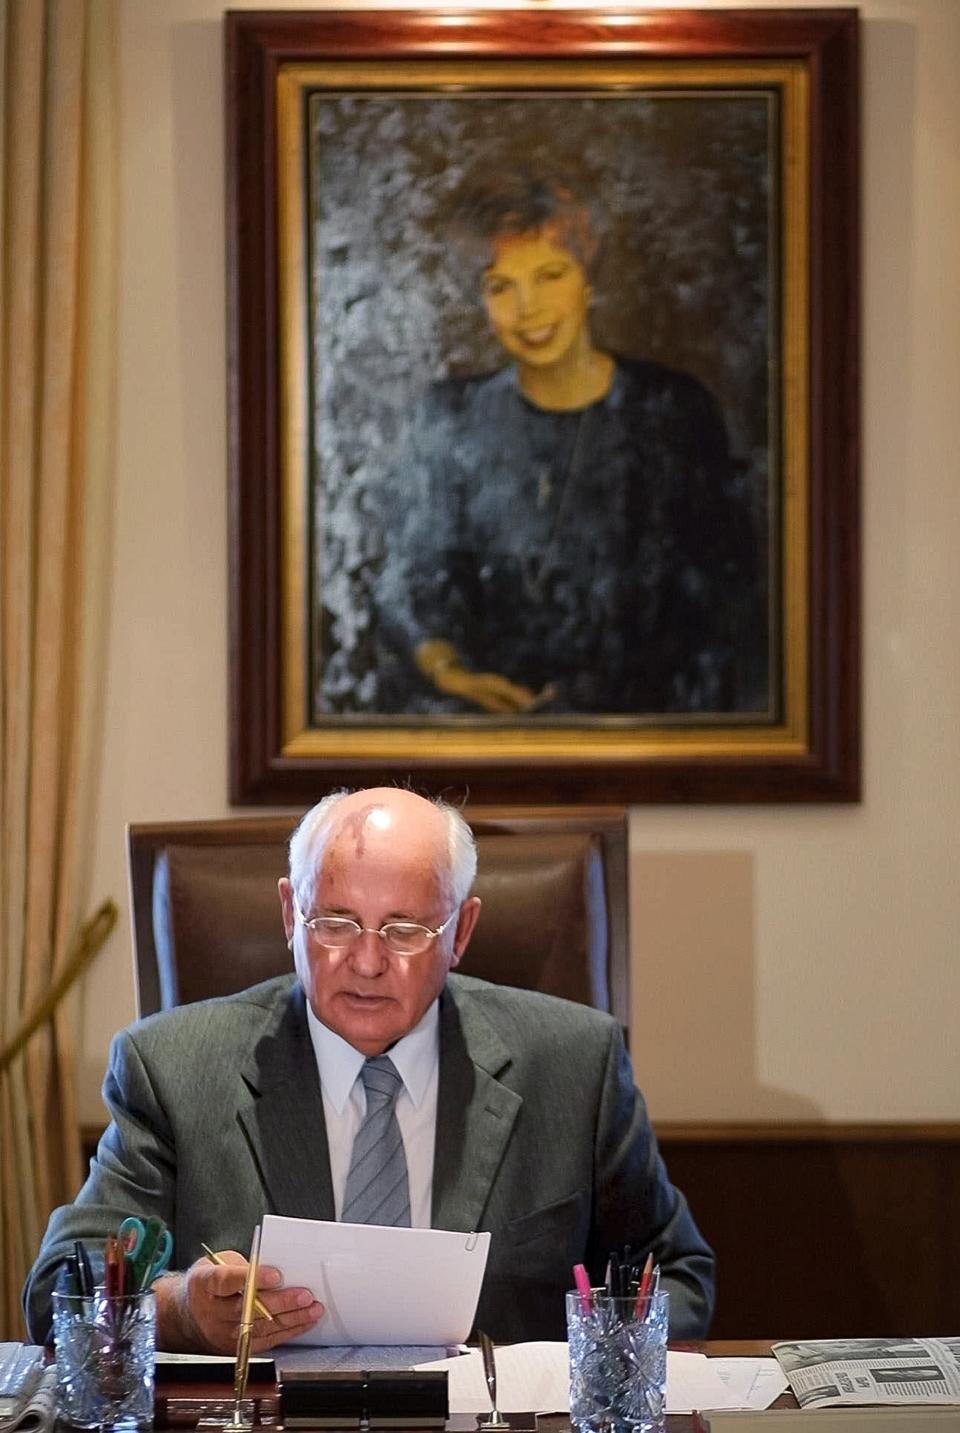 FILE - Former Soviet President Mikhail Gorbachev reads some notes in his office with a portrait of his late wife Raisa in the background, at the Gorbachev Fund in Moscow, Tuesday, Aug. 14, 2001. When Mikhail Gorbachev is buried Saturday at Moscow's Novodevichy Cemetery, he will once again be next to his wife, Raisa, with whom he shared the world stage in a visibly close and loving marriage that was unprecedented for a Soviet leader. Gorbachev's very public devotion to his family broke the stuffy mold of previous Soviet leaders, just as his openness to political reform did. (AP Photo/Alexander Zemlianichenko, File)